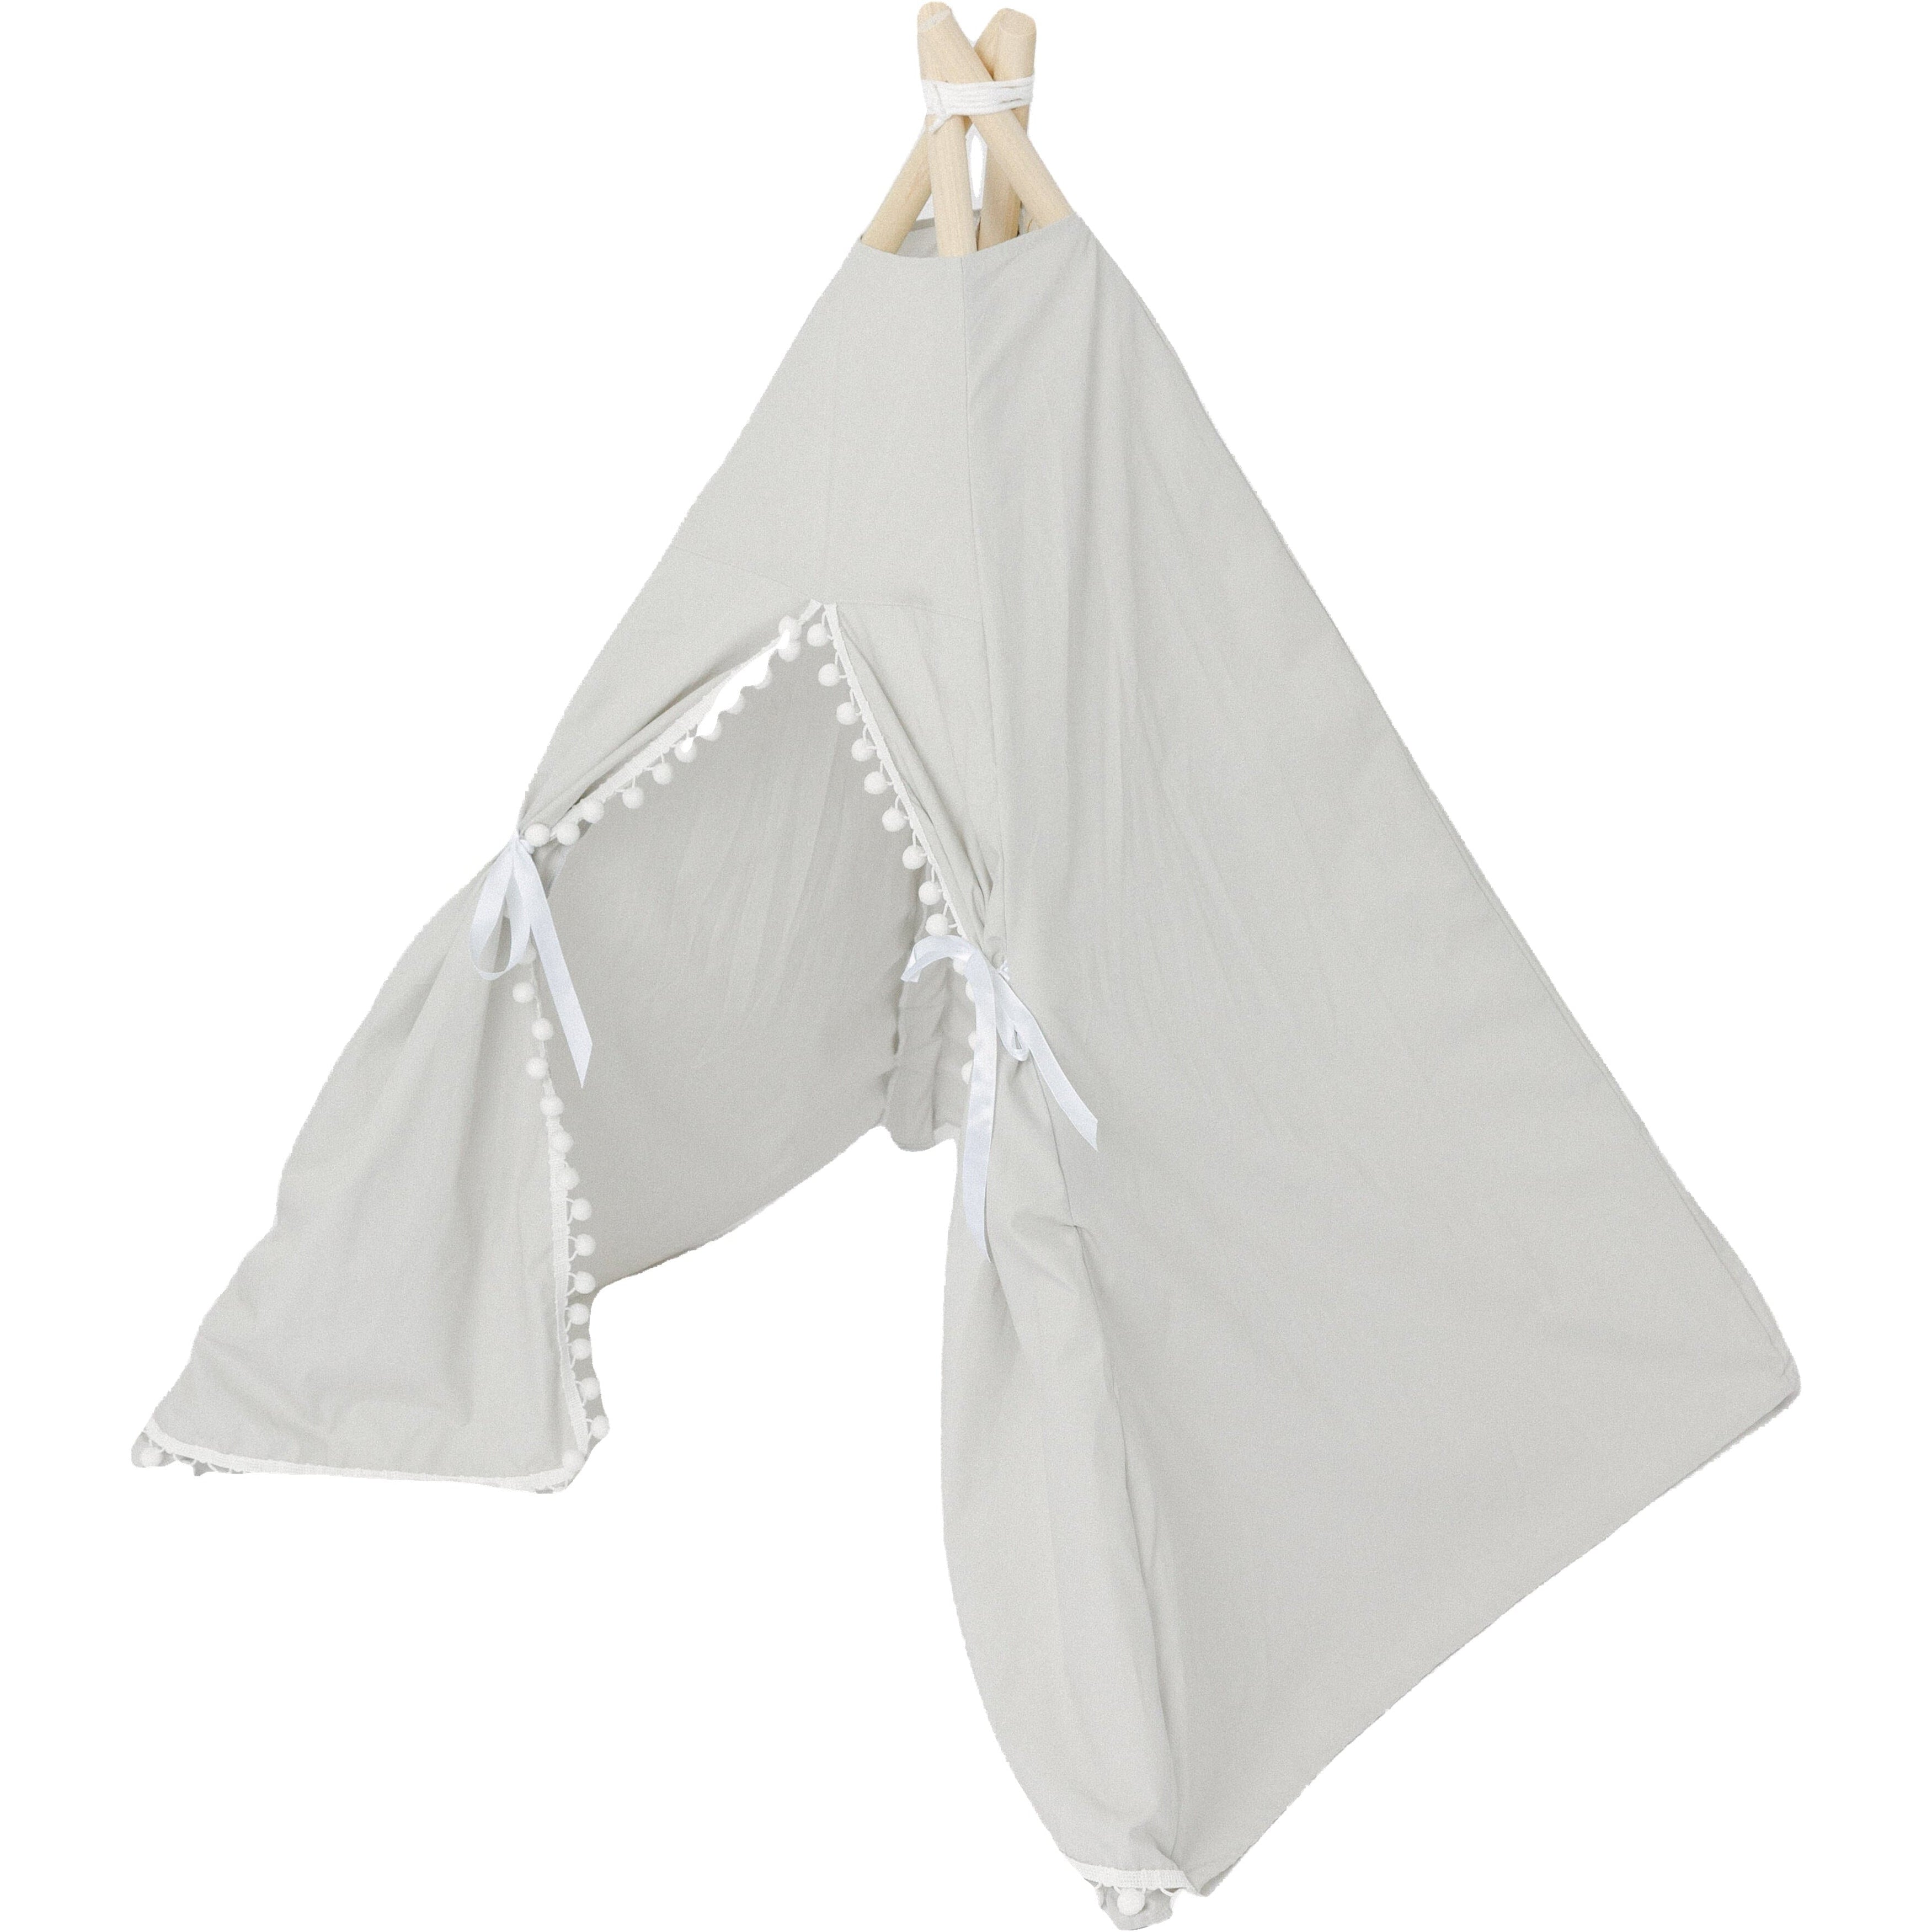 The Gray Itty Bitty Play Tent